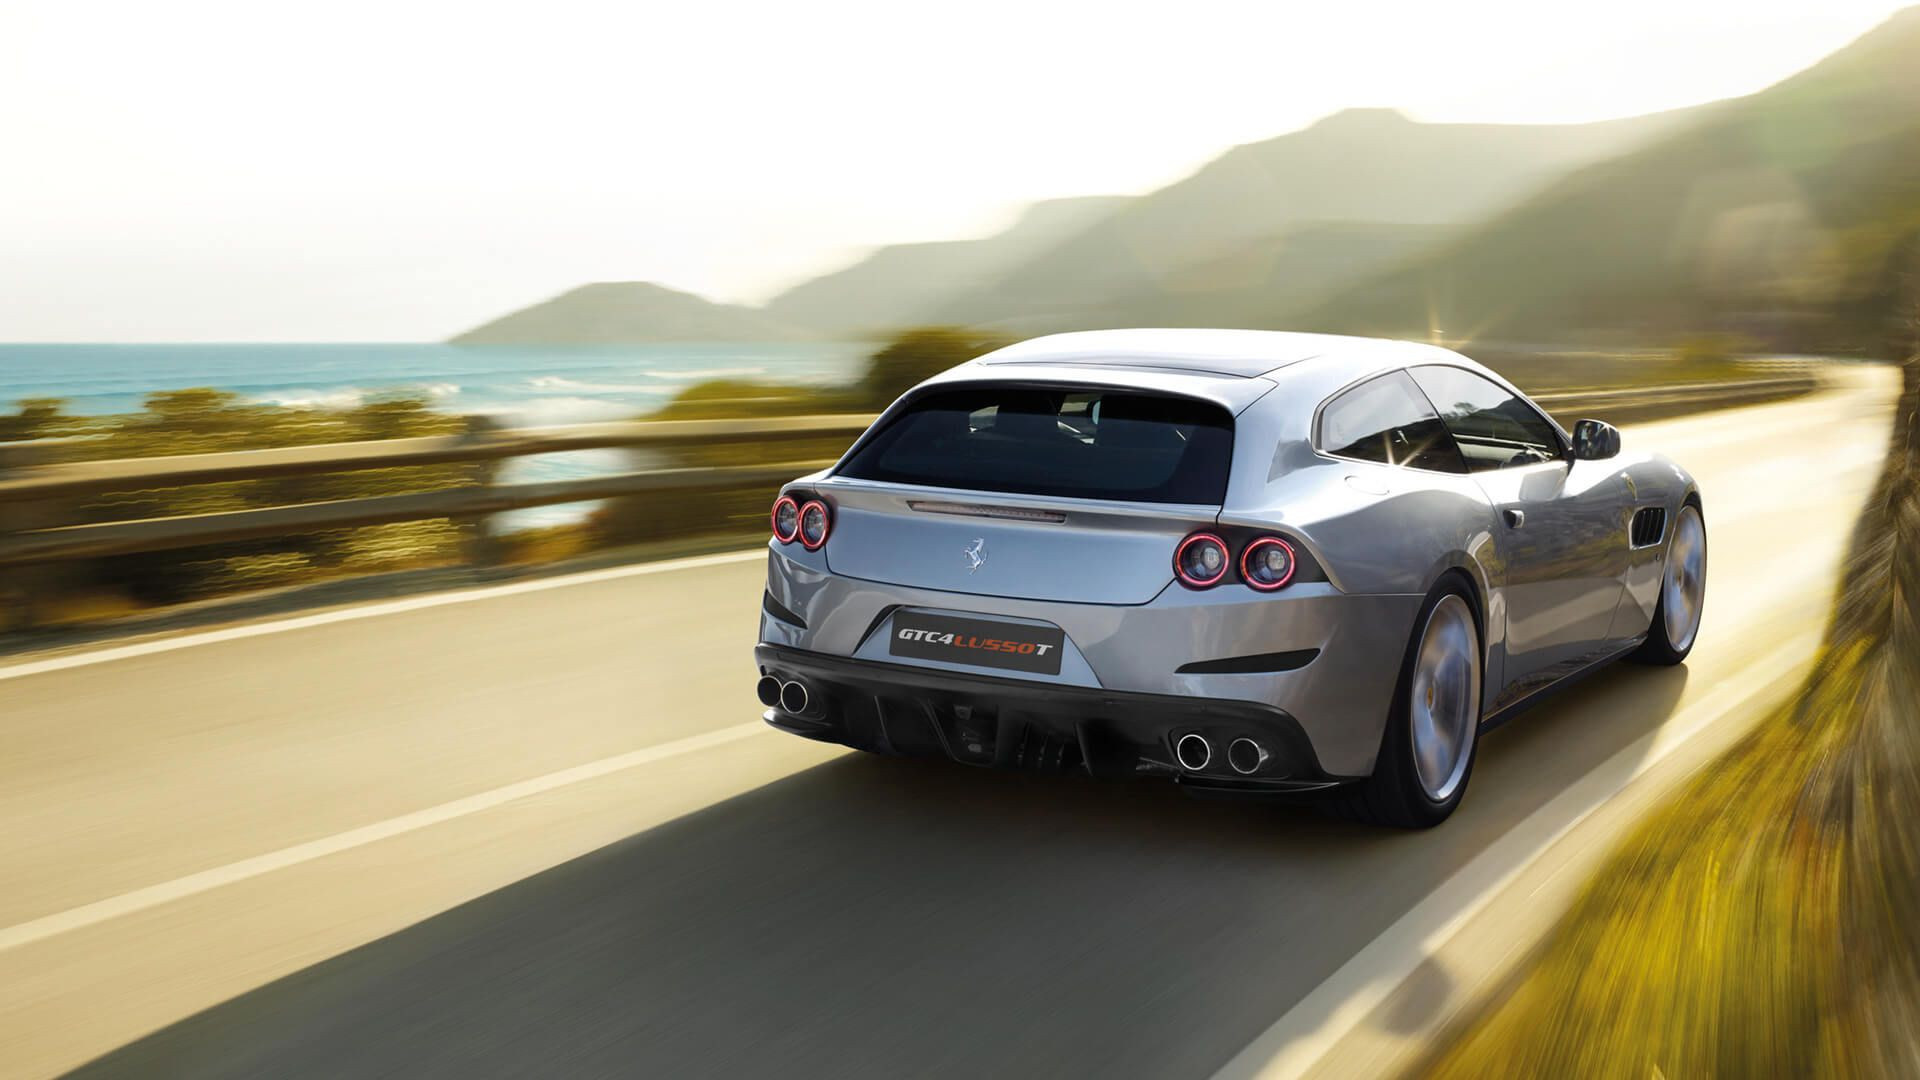 The rear end of the 2019 Ferrari GTC4 Lusso T. 